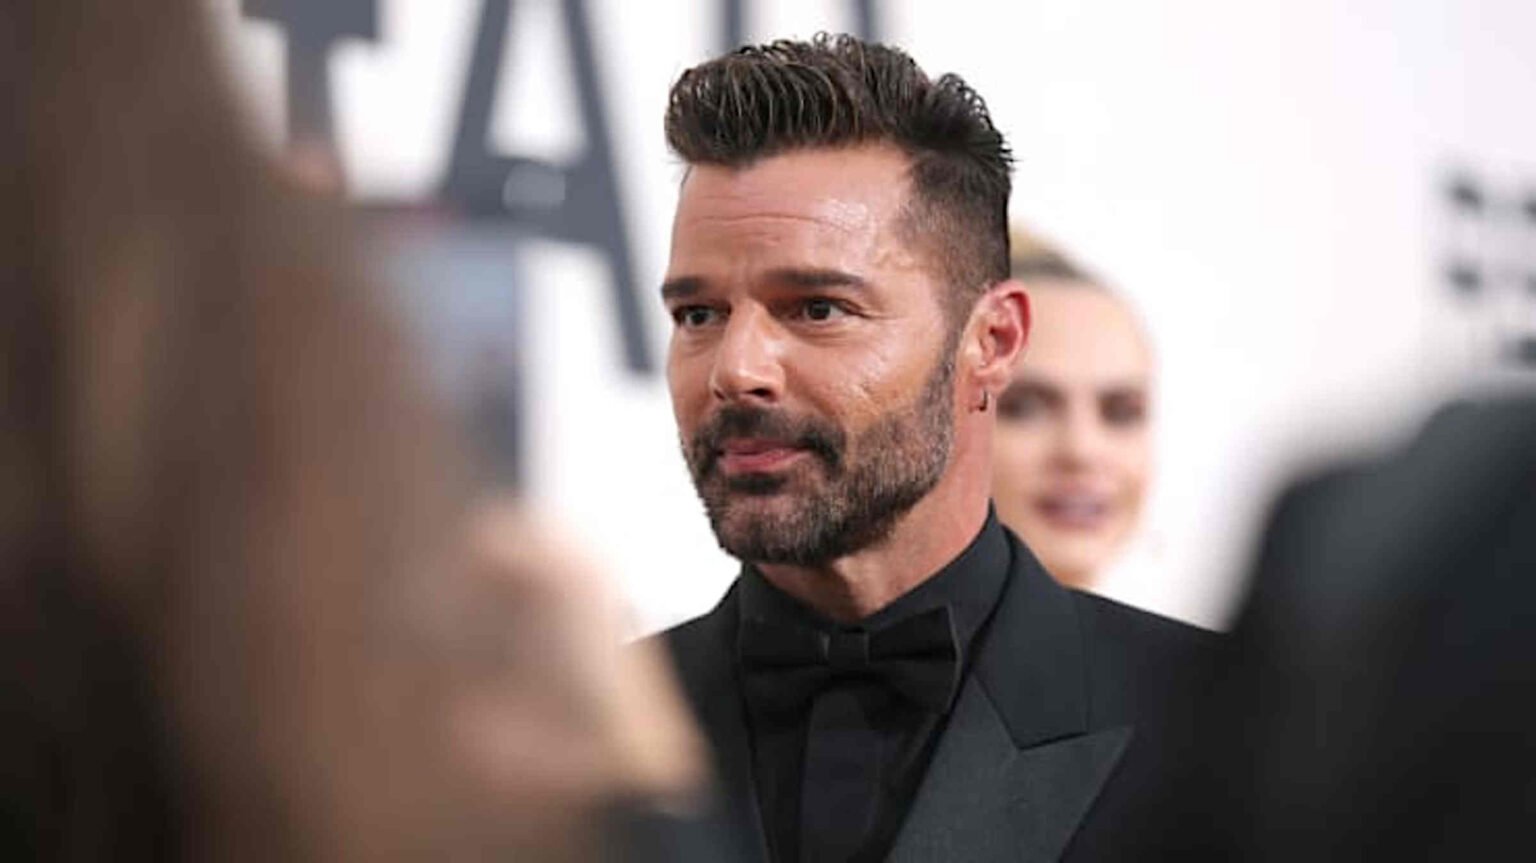 You may not be a "Livin' La Vida Loca" fan for much longer after reading these claims, even after Ricky Martin's nephew dropped the incest charges.